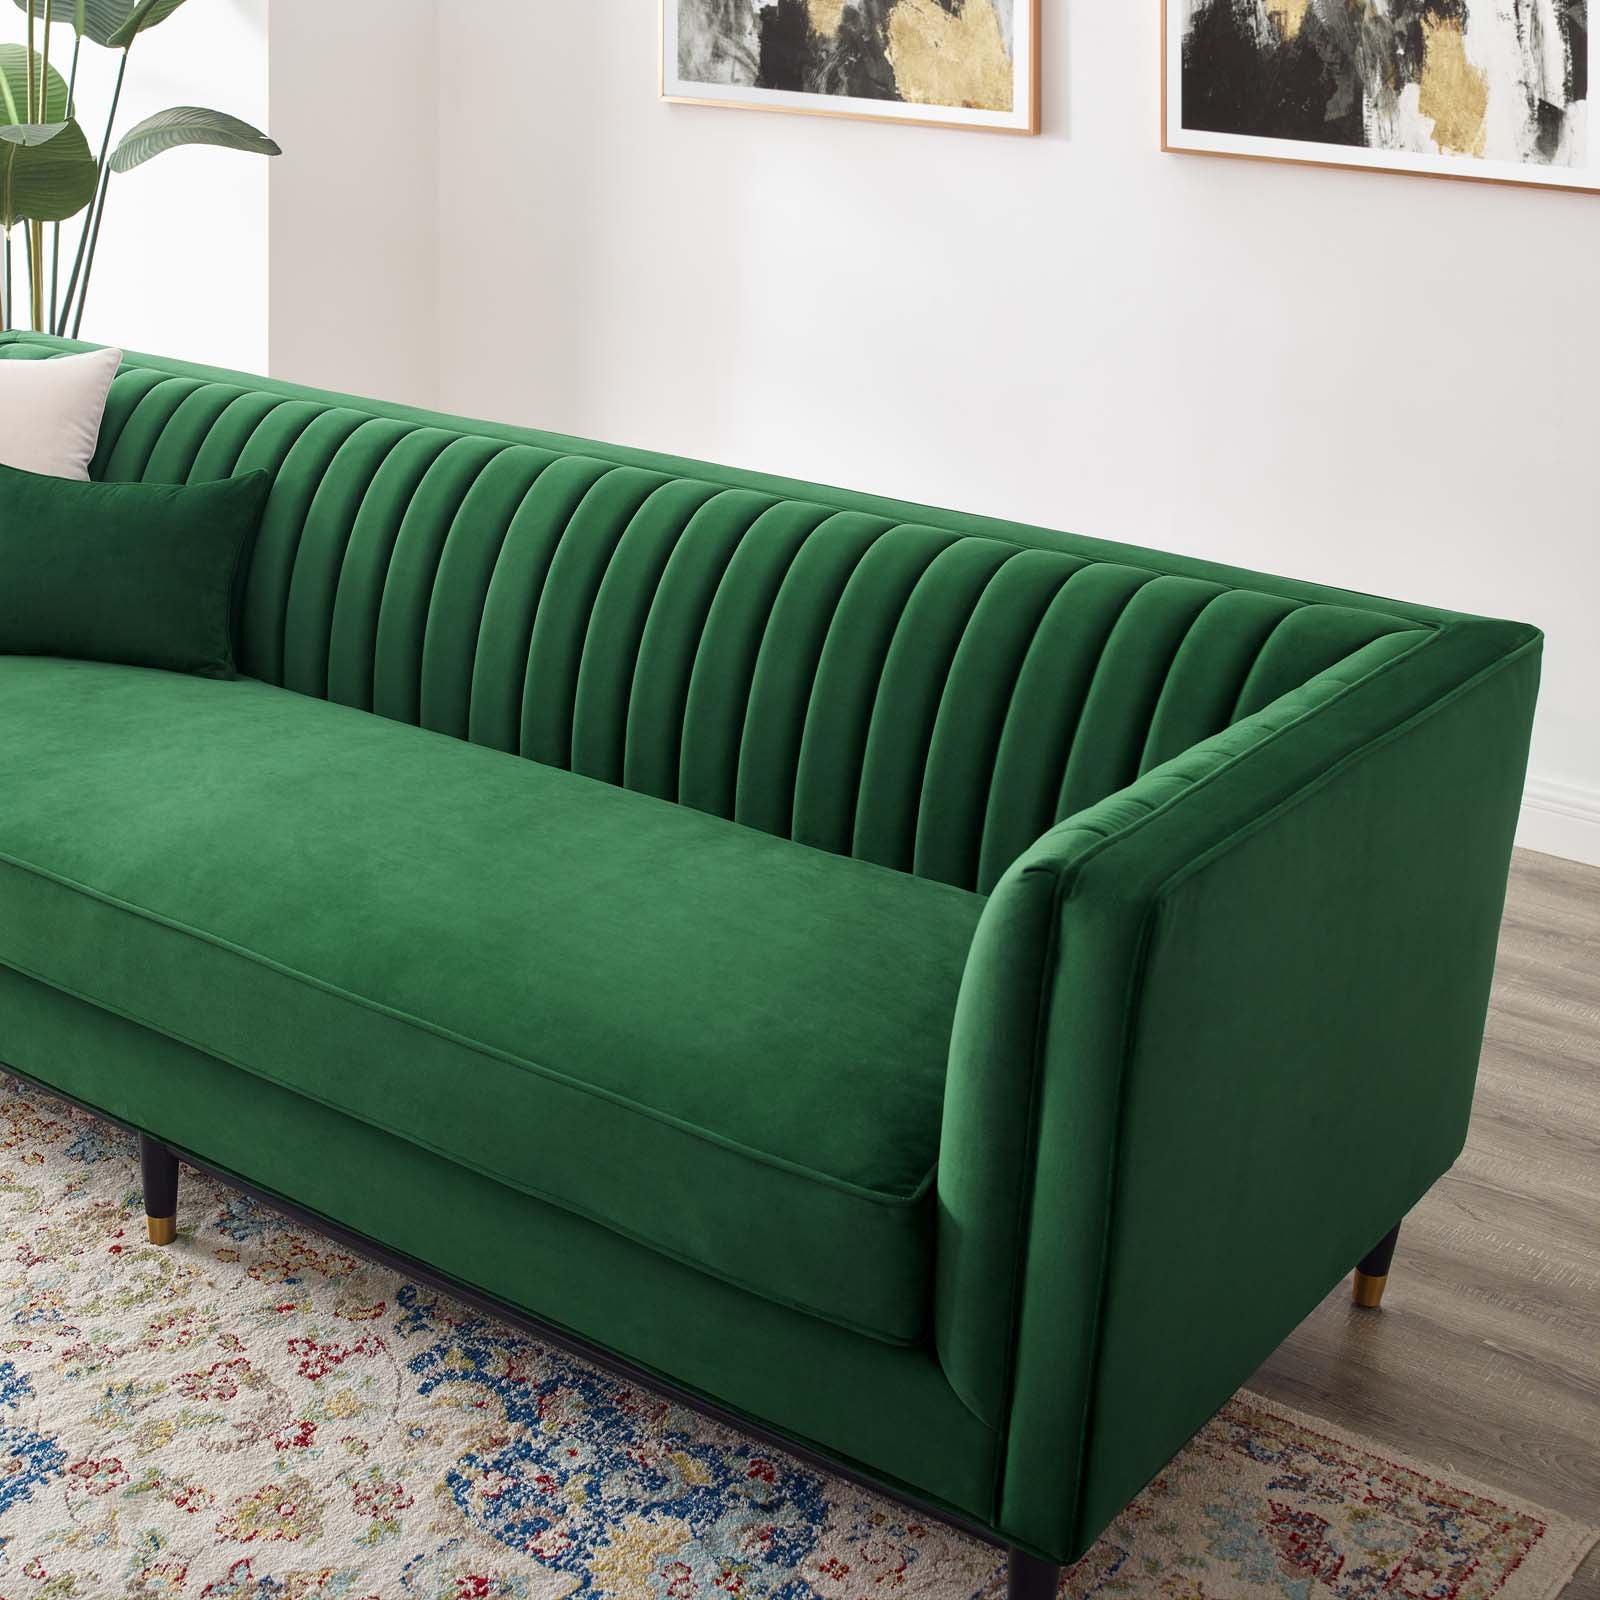 Modway Sofas & Couches - Devote Channel Tufted Performance Velvet Sofa Emerald